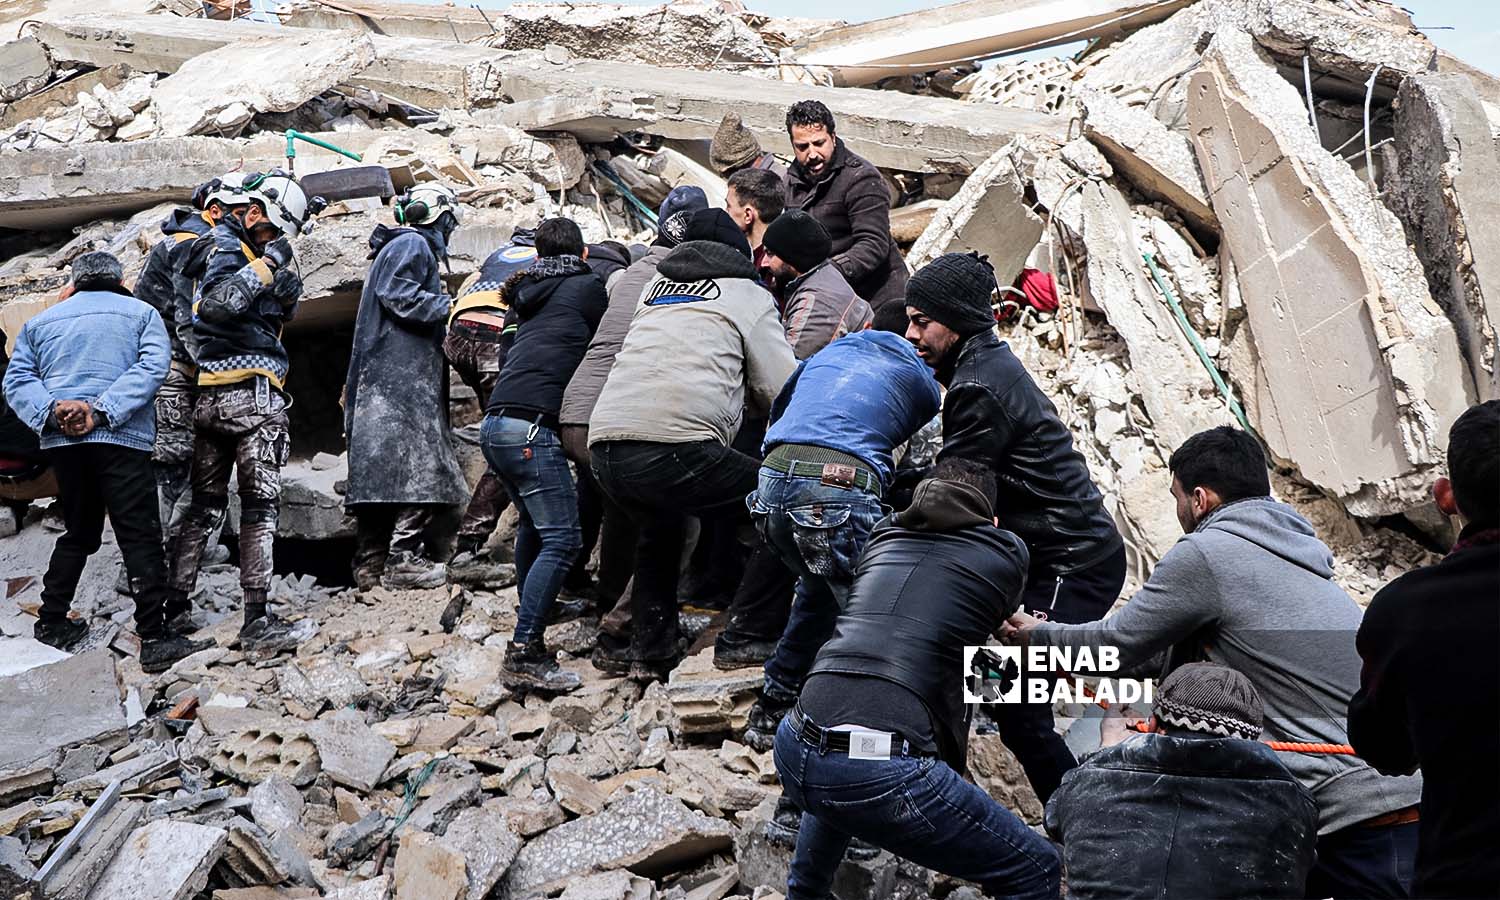 Volunteers try to rescue and lift survivors from under the rubble in Azmarin village following the earthquake that struck the northwestern Syrian region - February 7, 2023 (Enab Baladi/Mohammad Nasan Dabel)
